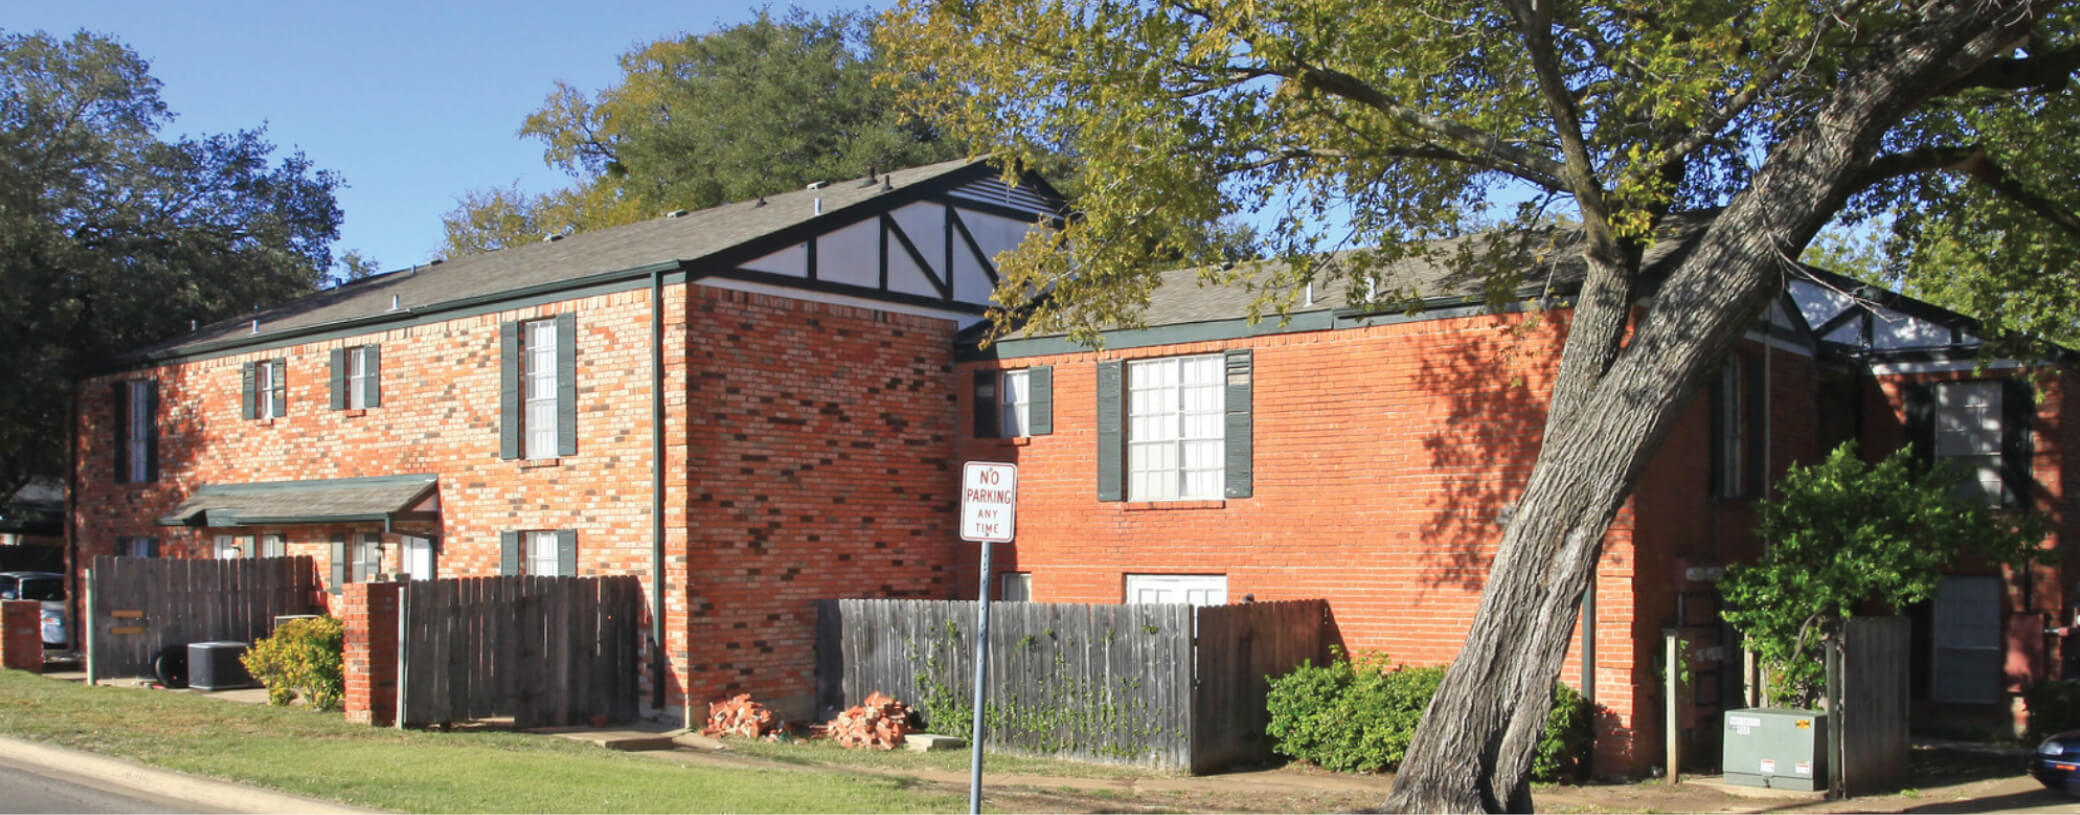 A view of a two-story building at Holly Oaks.